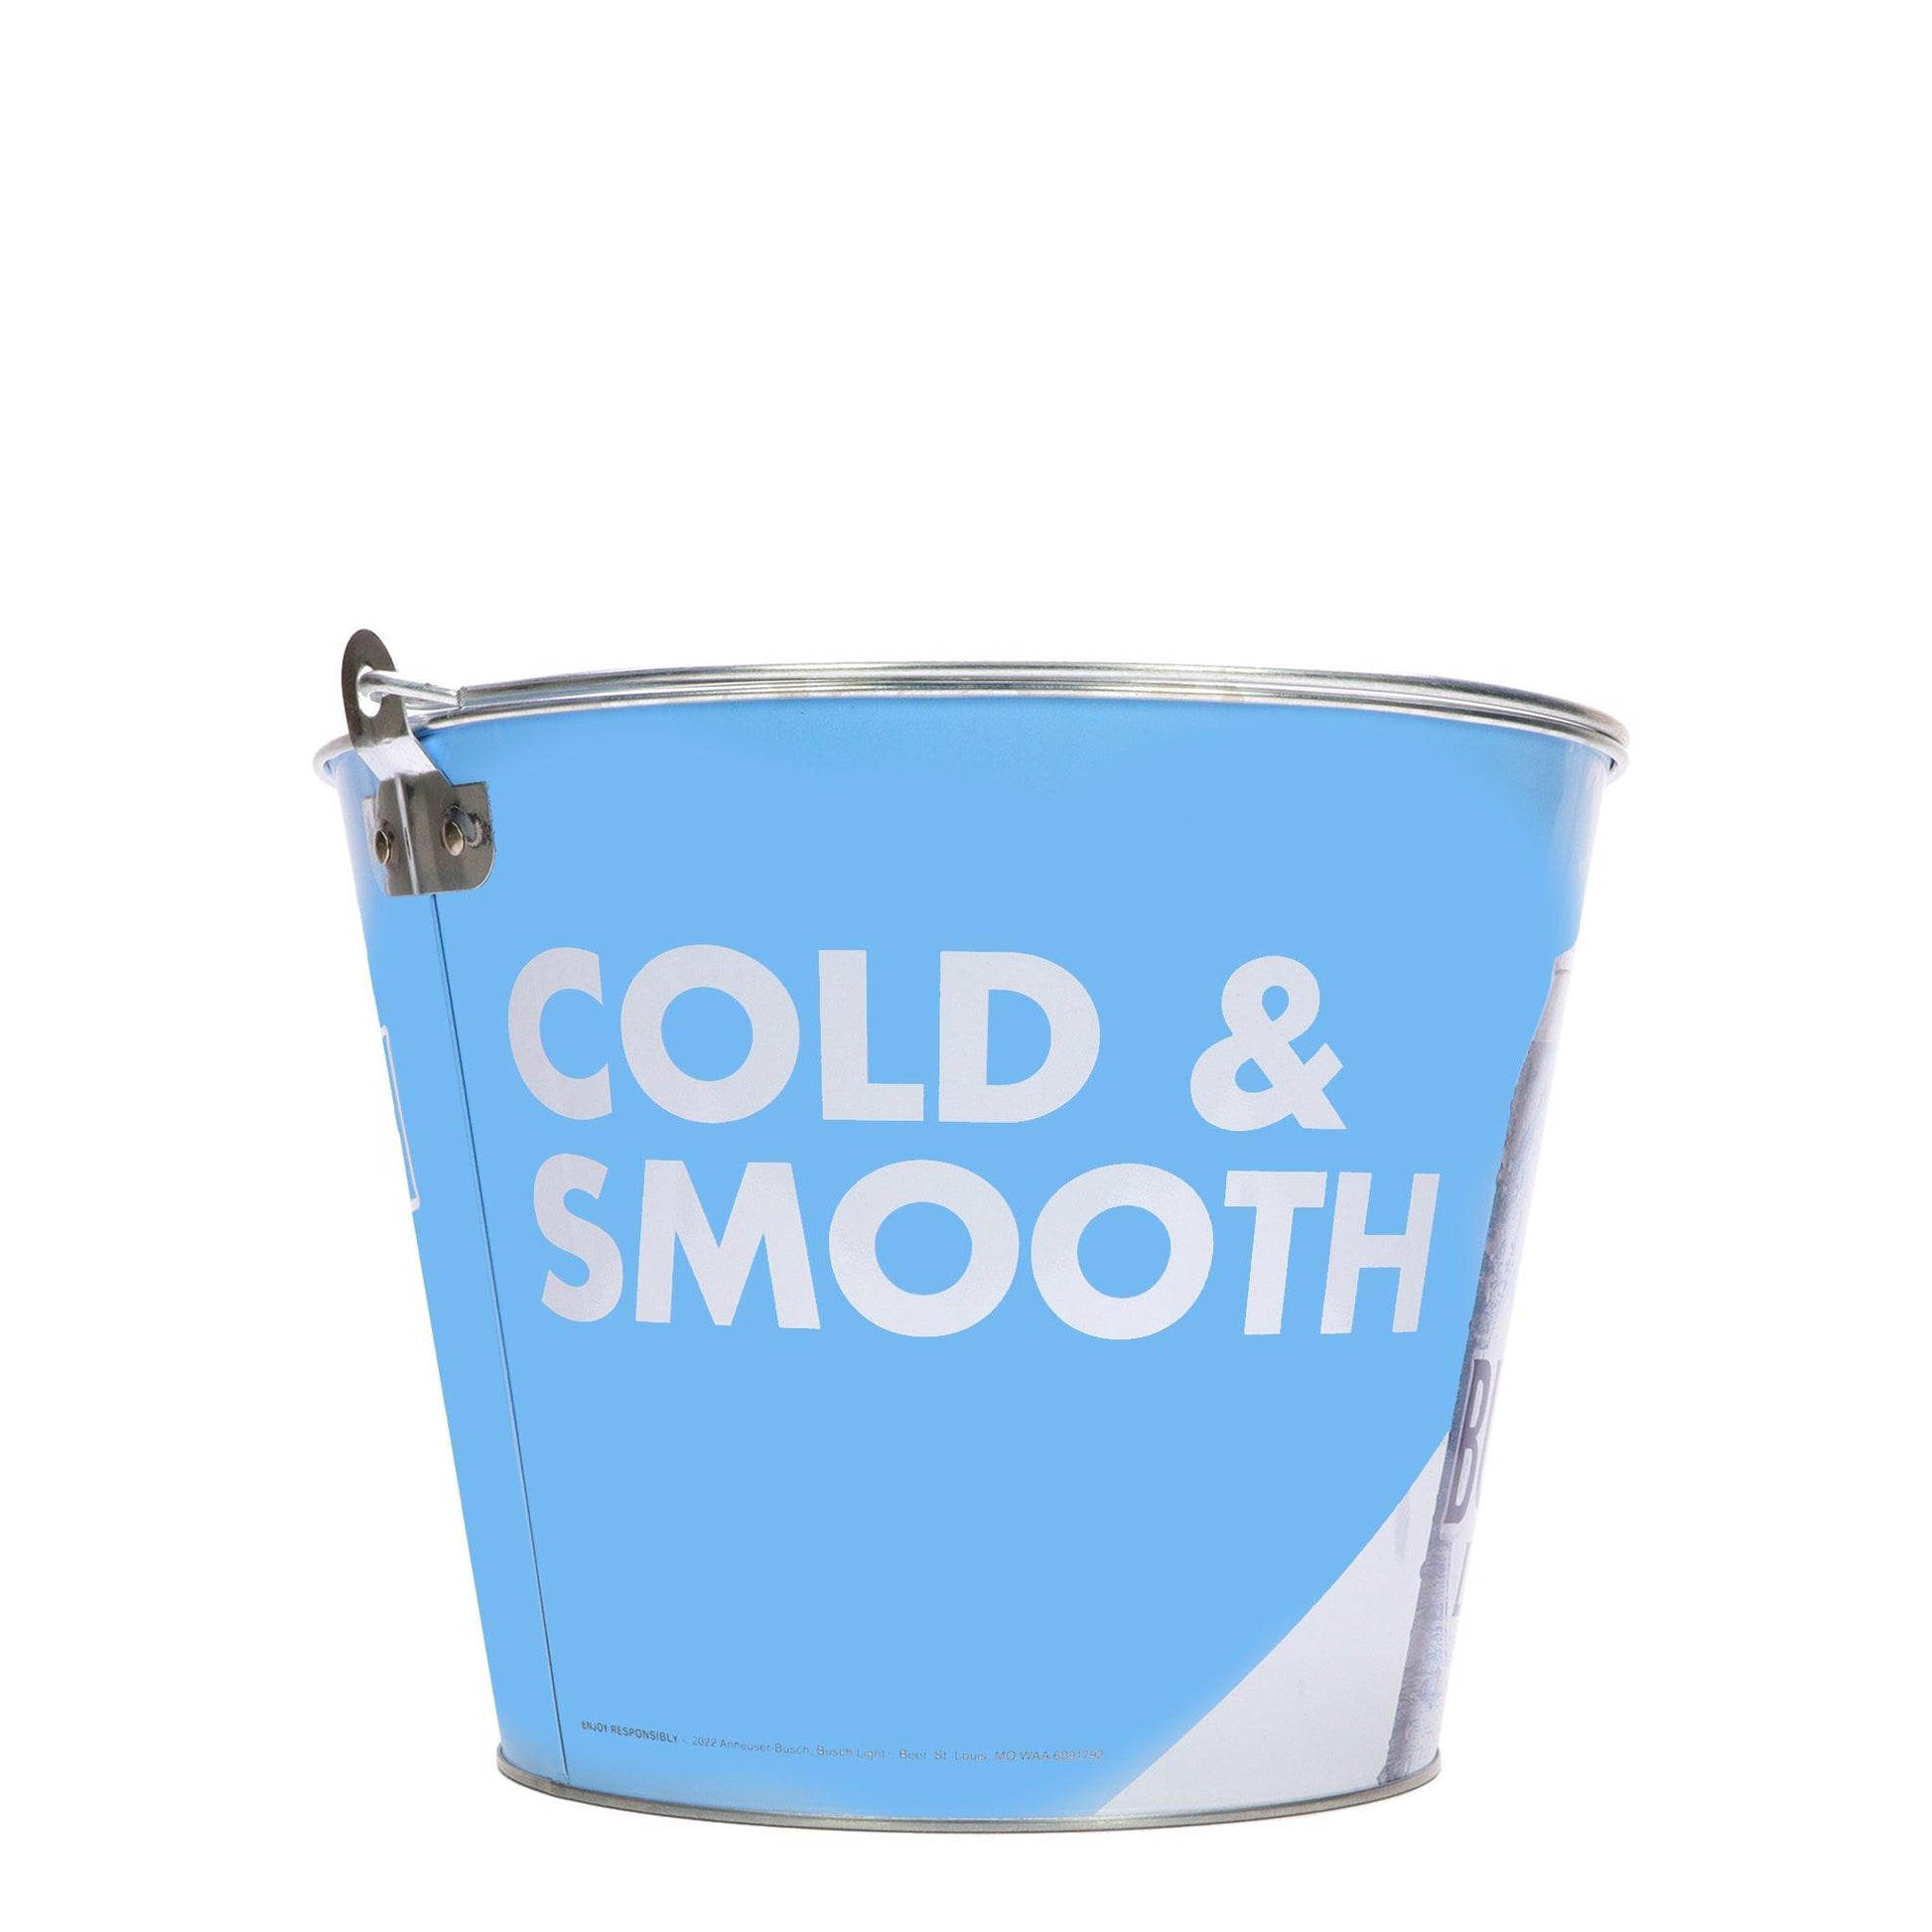 cold and smooth on the side of bucket 